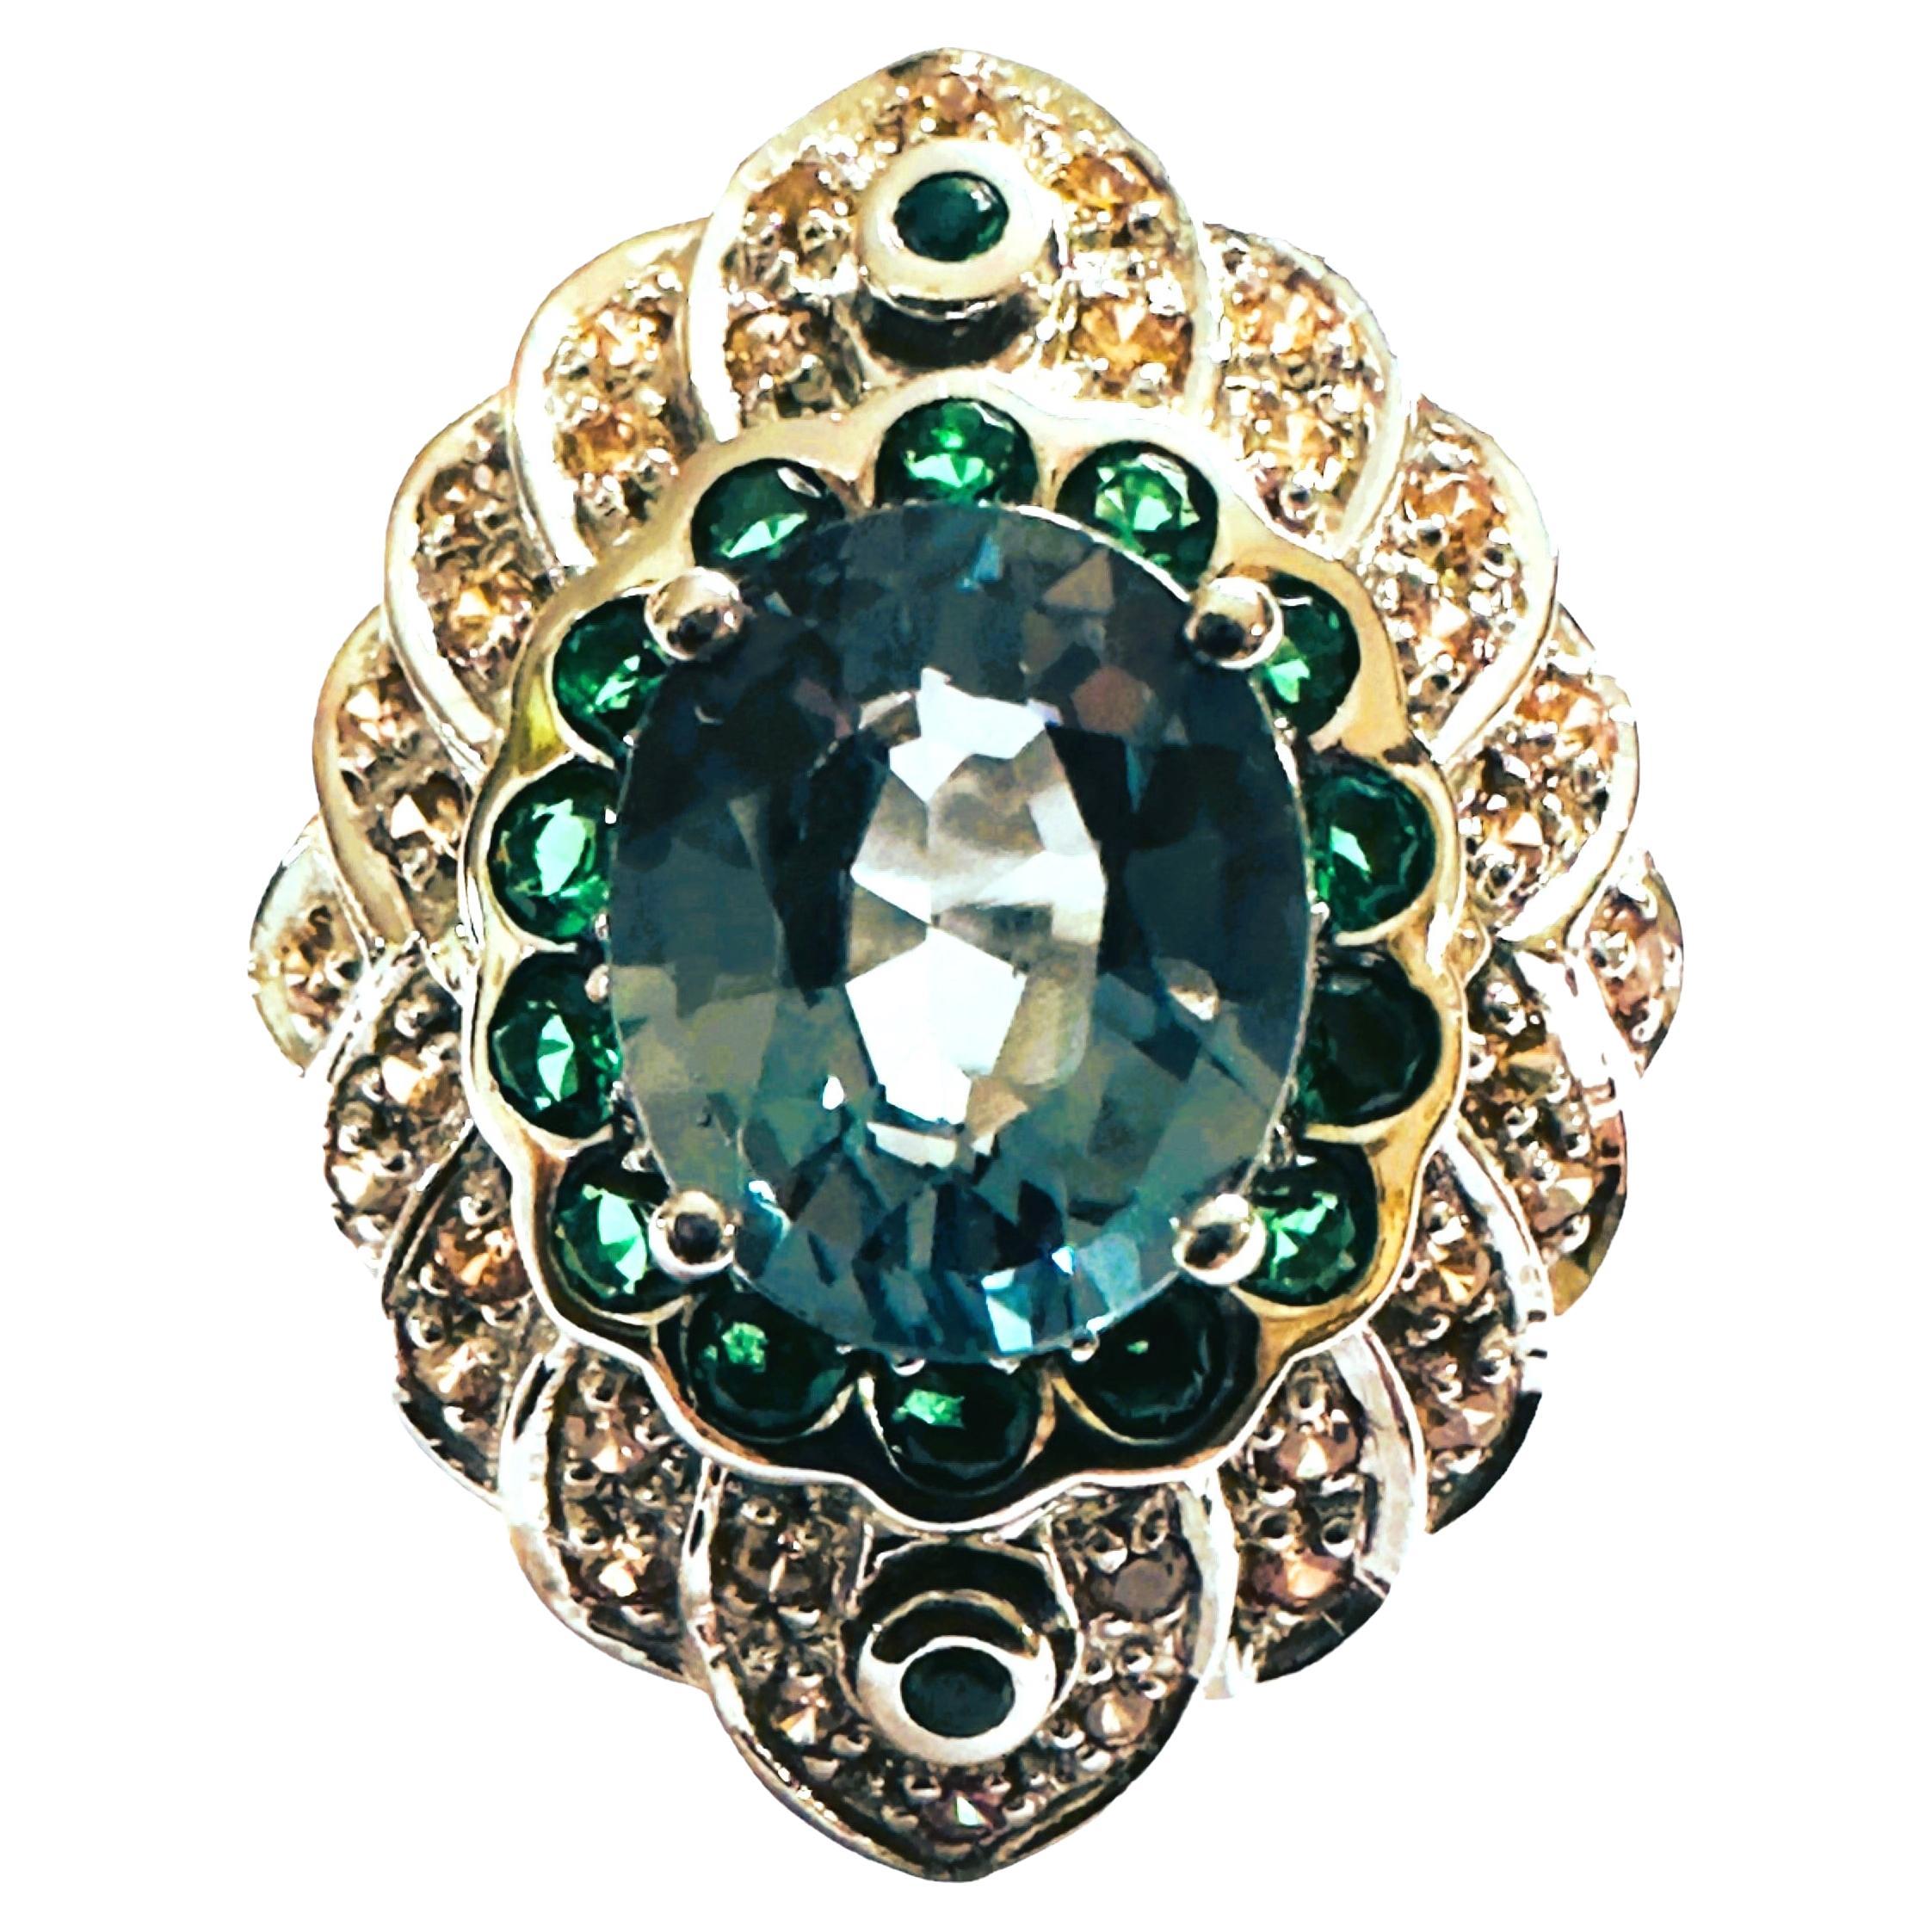 New African 4.60 Ct Green Garnet & Champagne Sapphire Sterling Silver Ring